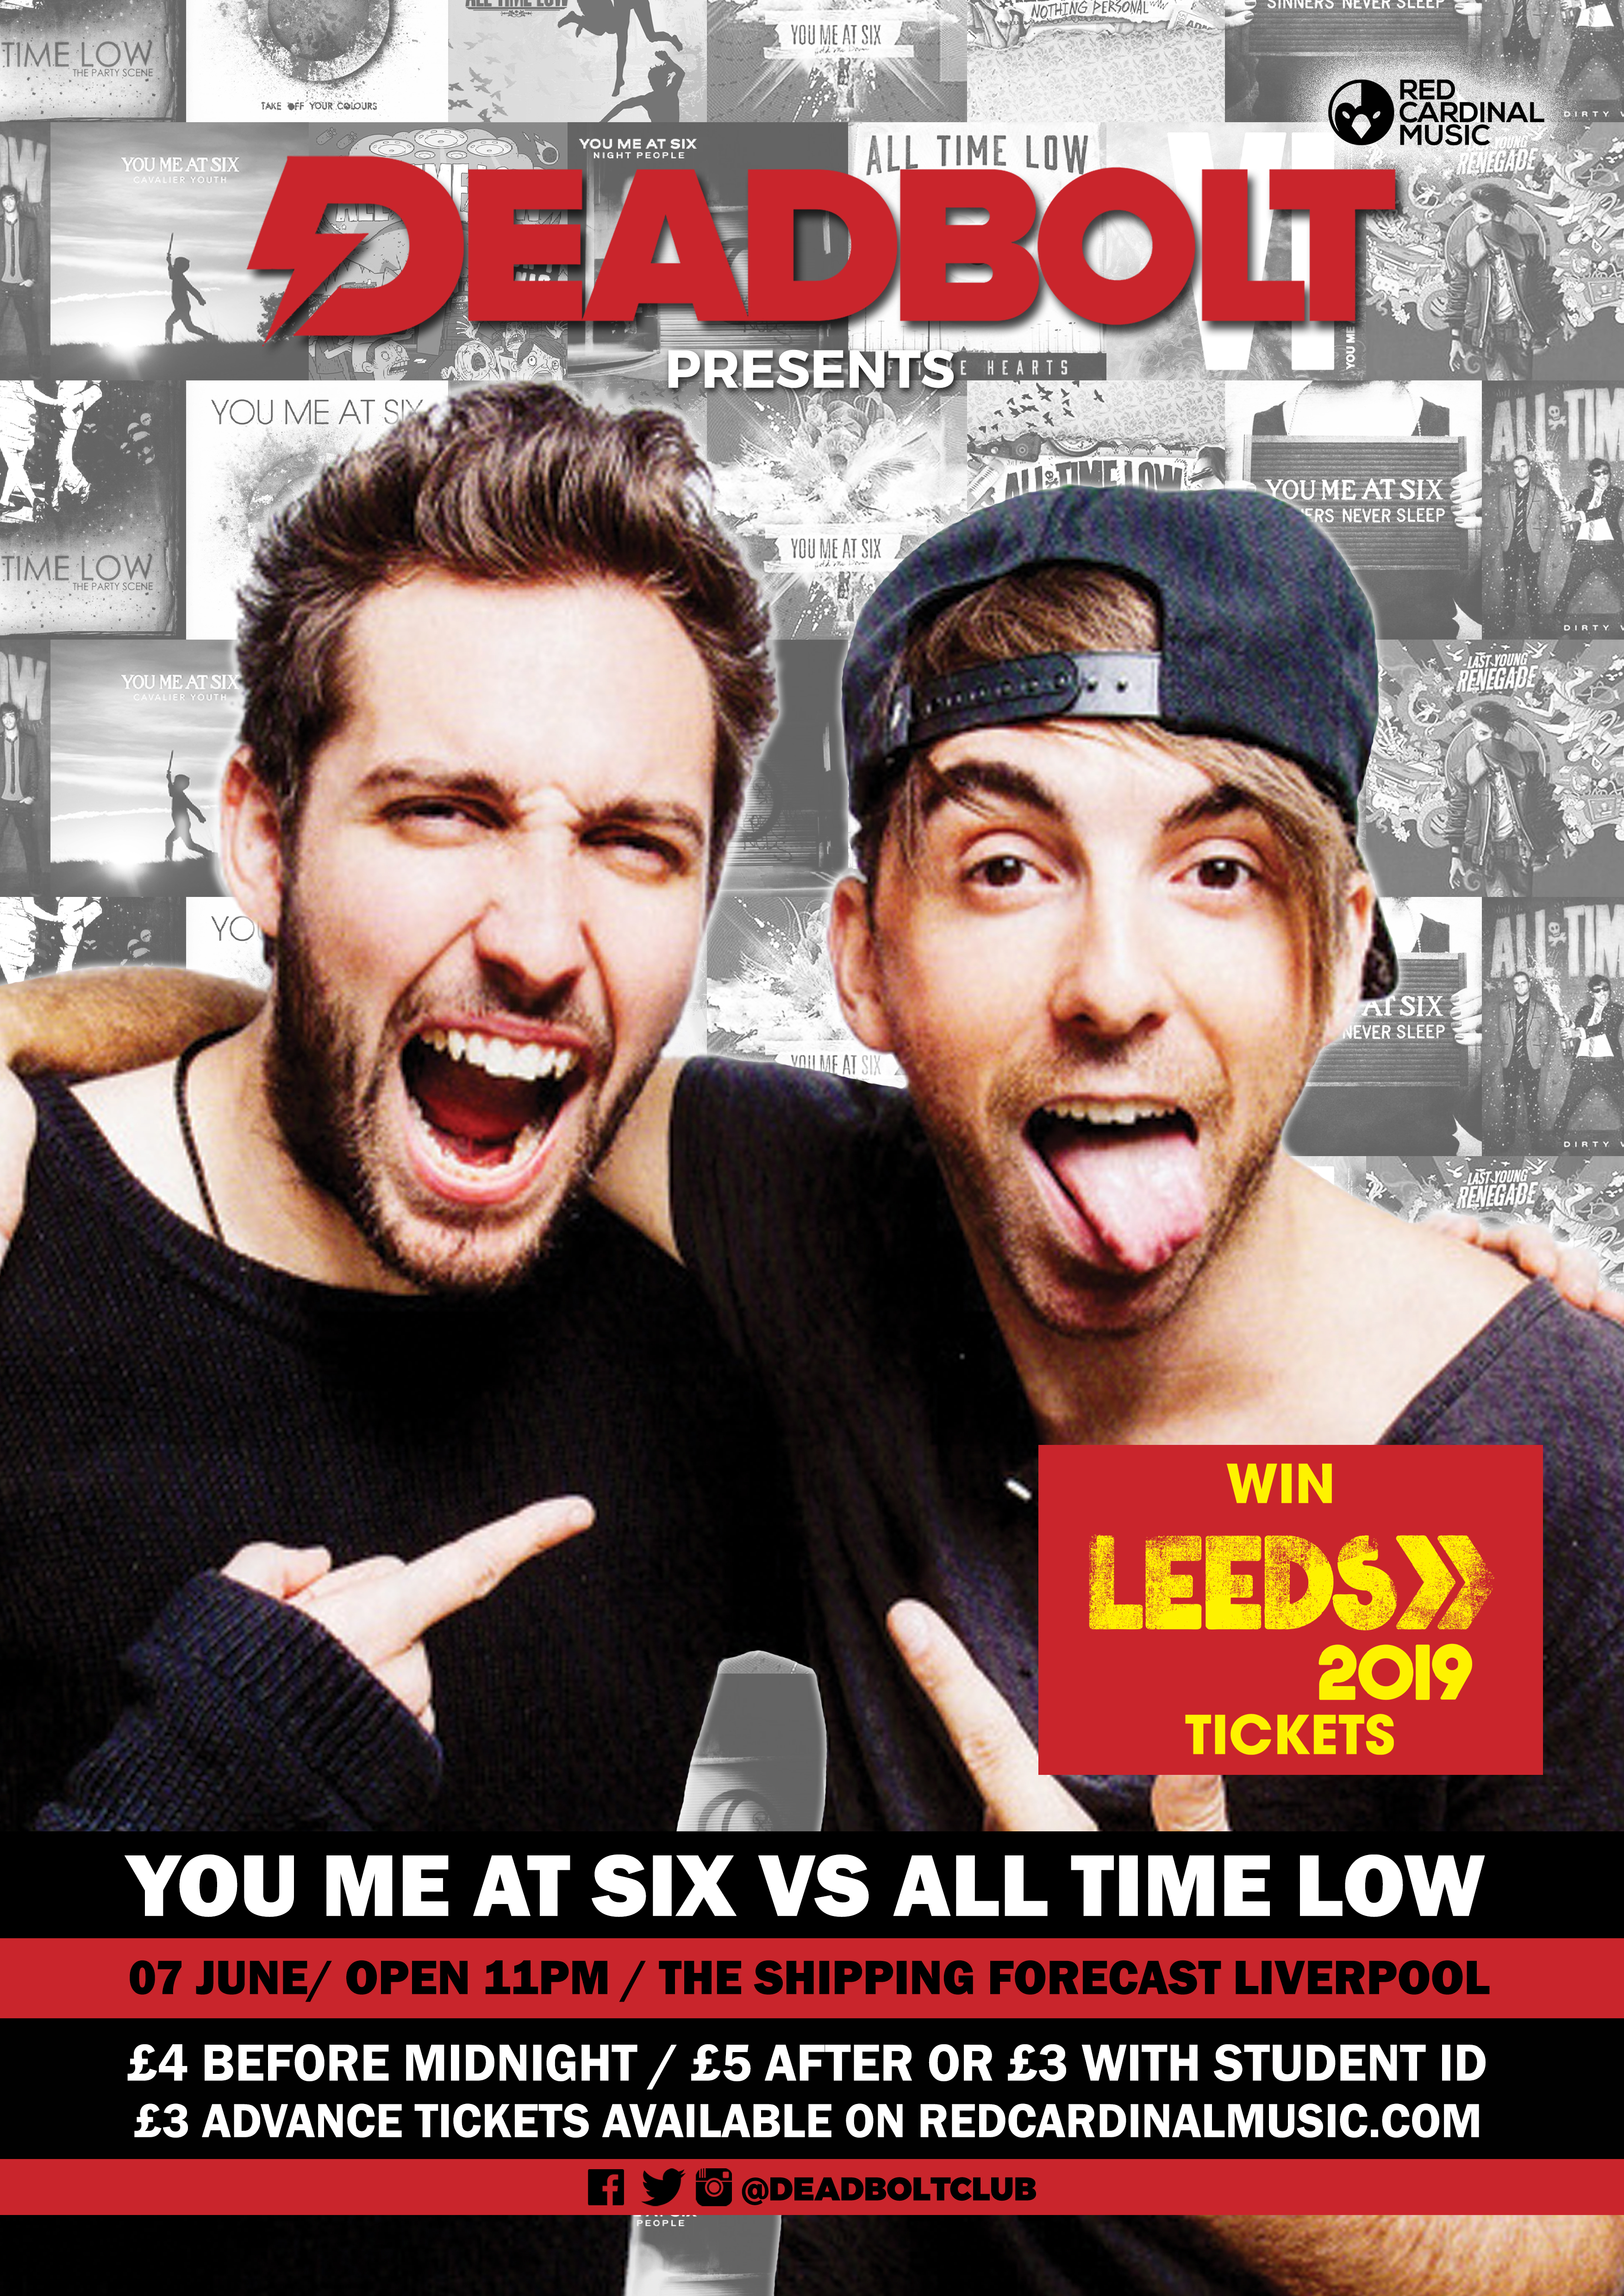 Deadbolt Liverpool - You Me A Six vs All Time Low - The Shipping Forecast Liverpool - Win Leeds Festival Tickets - 07 Jun 19 - Red Cardinal Music